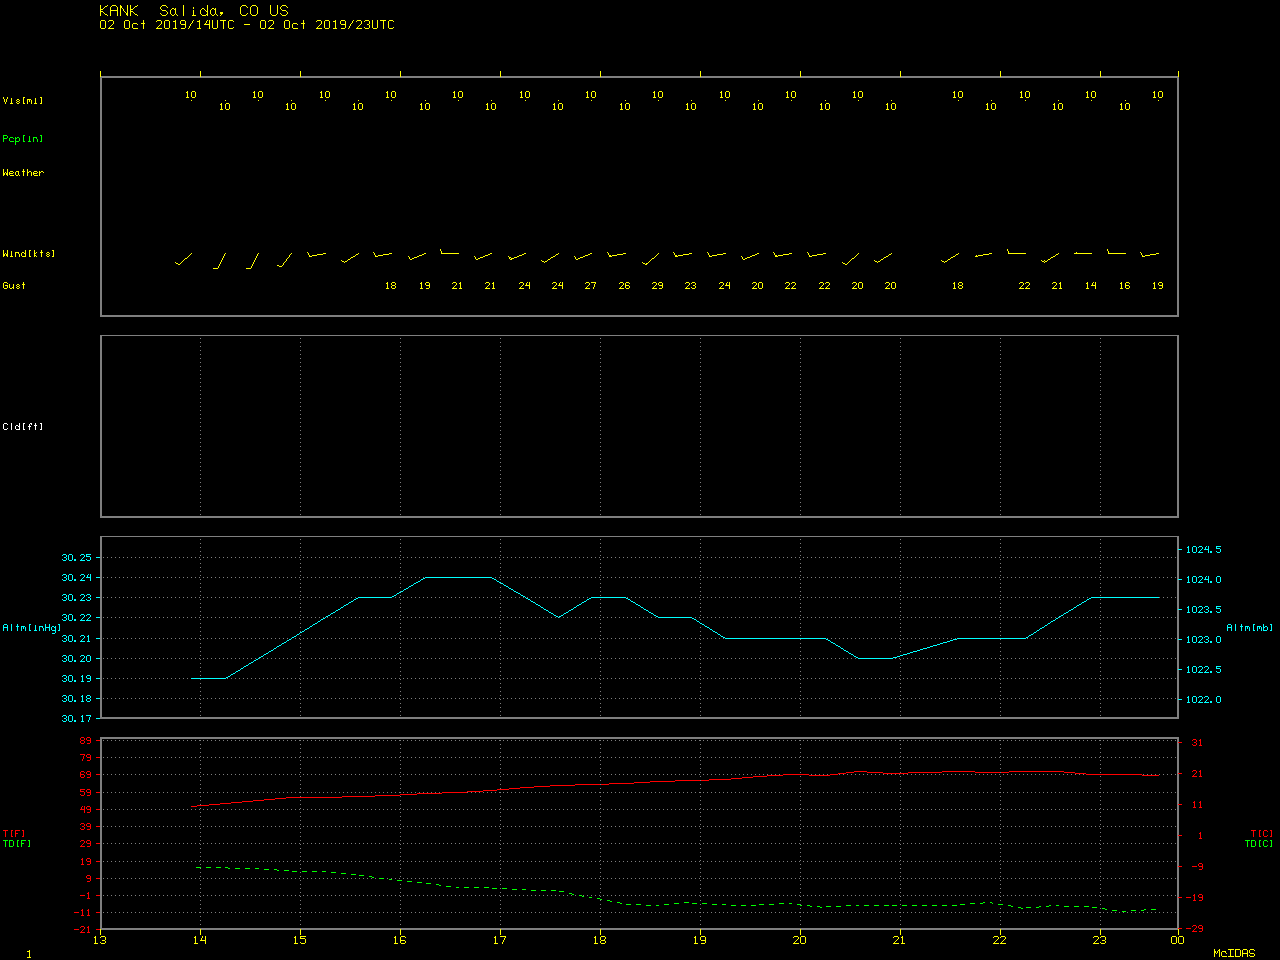 Time series of surface observation data from Salida, Colorado [click to enlarge]